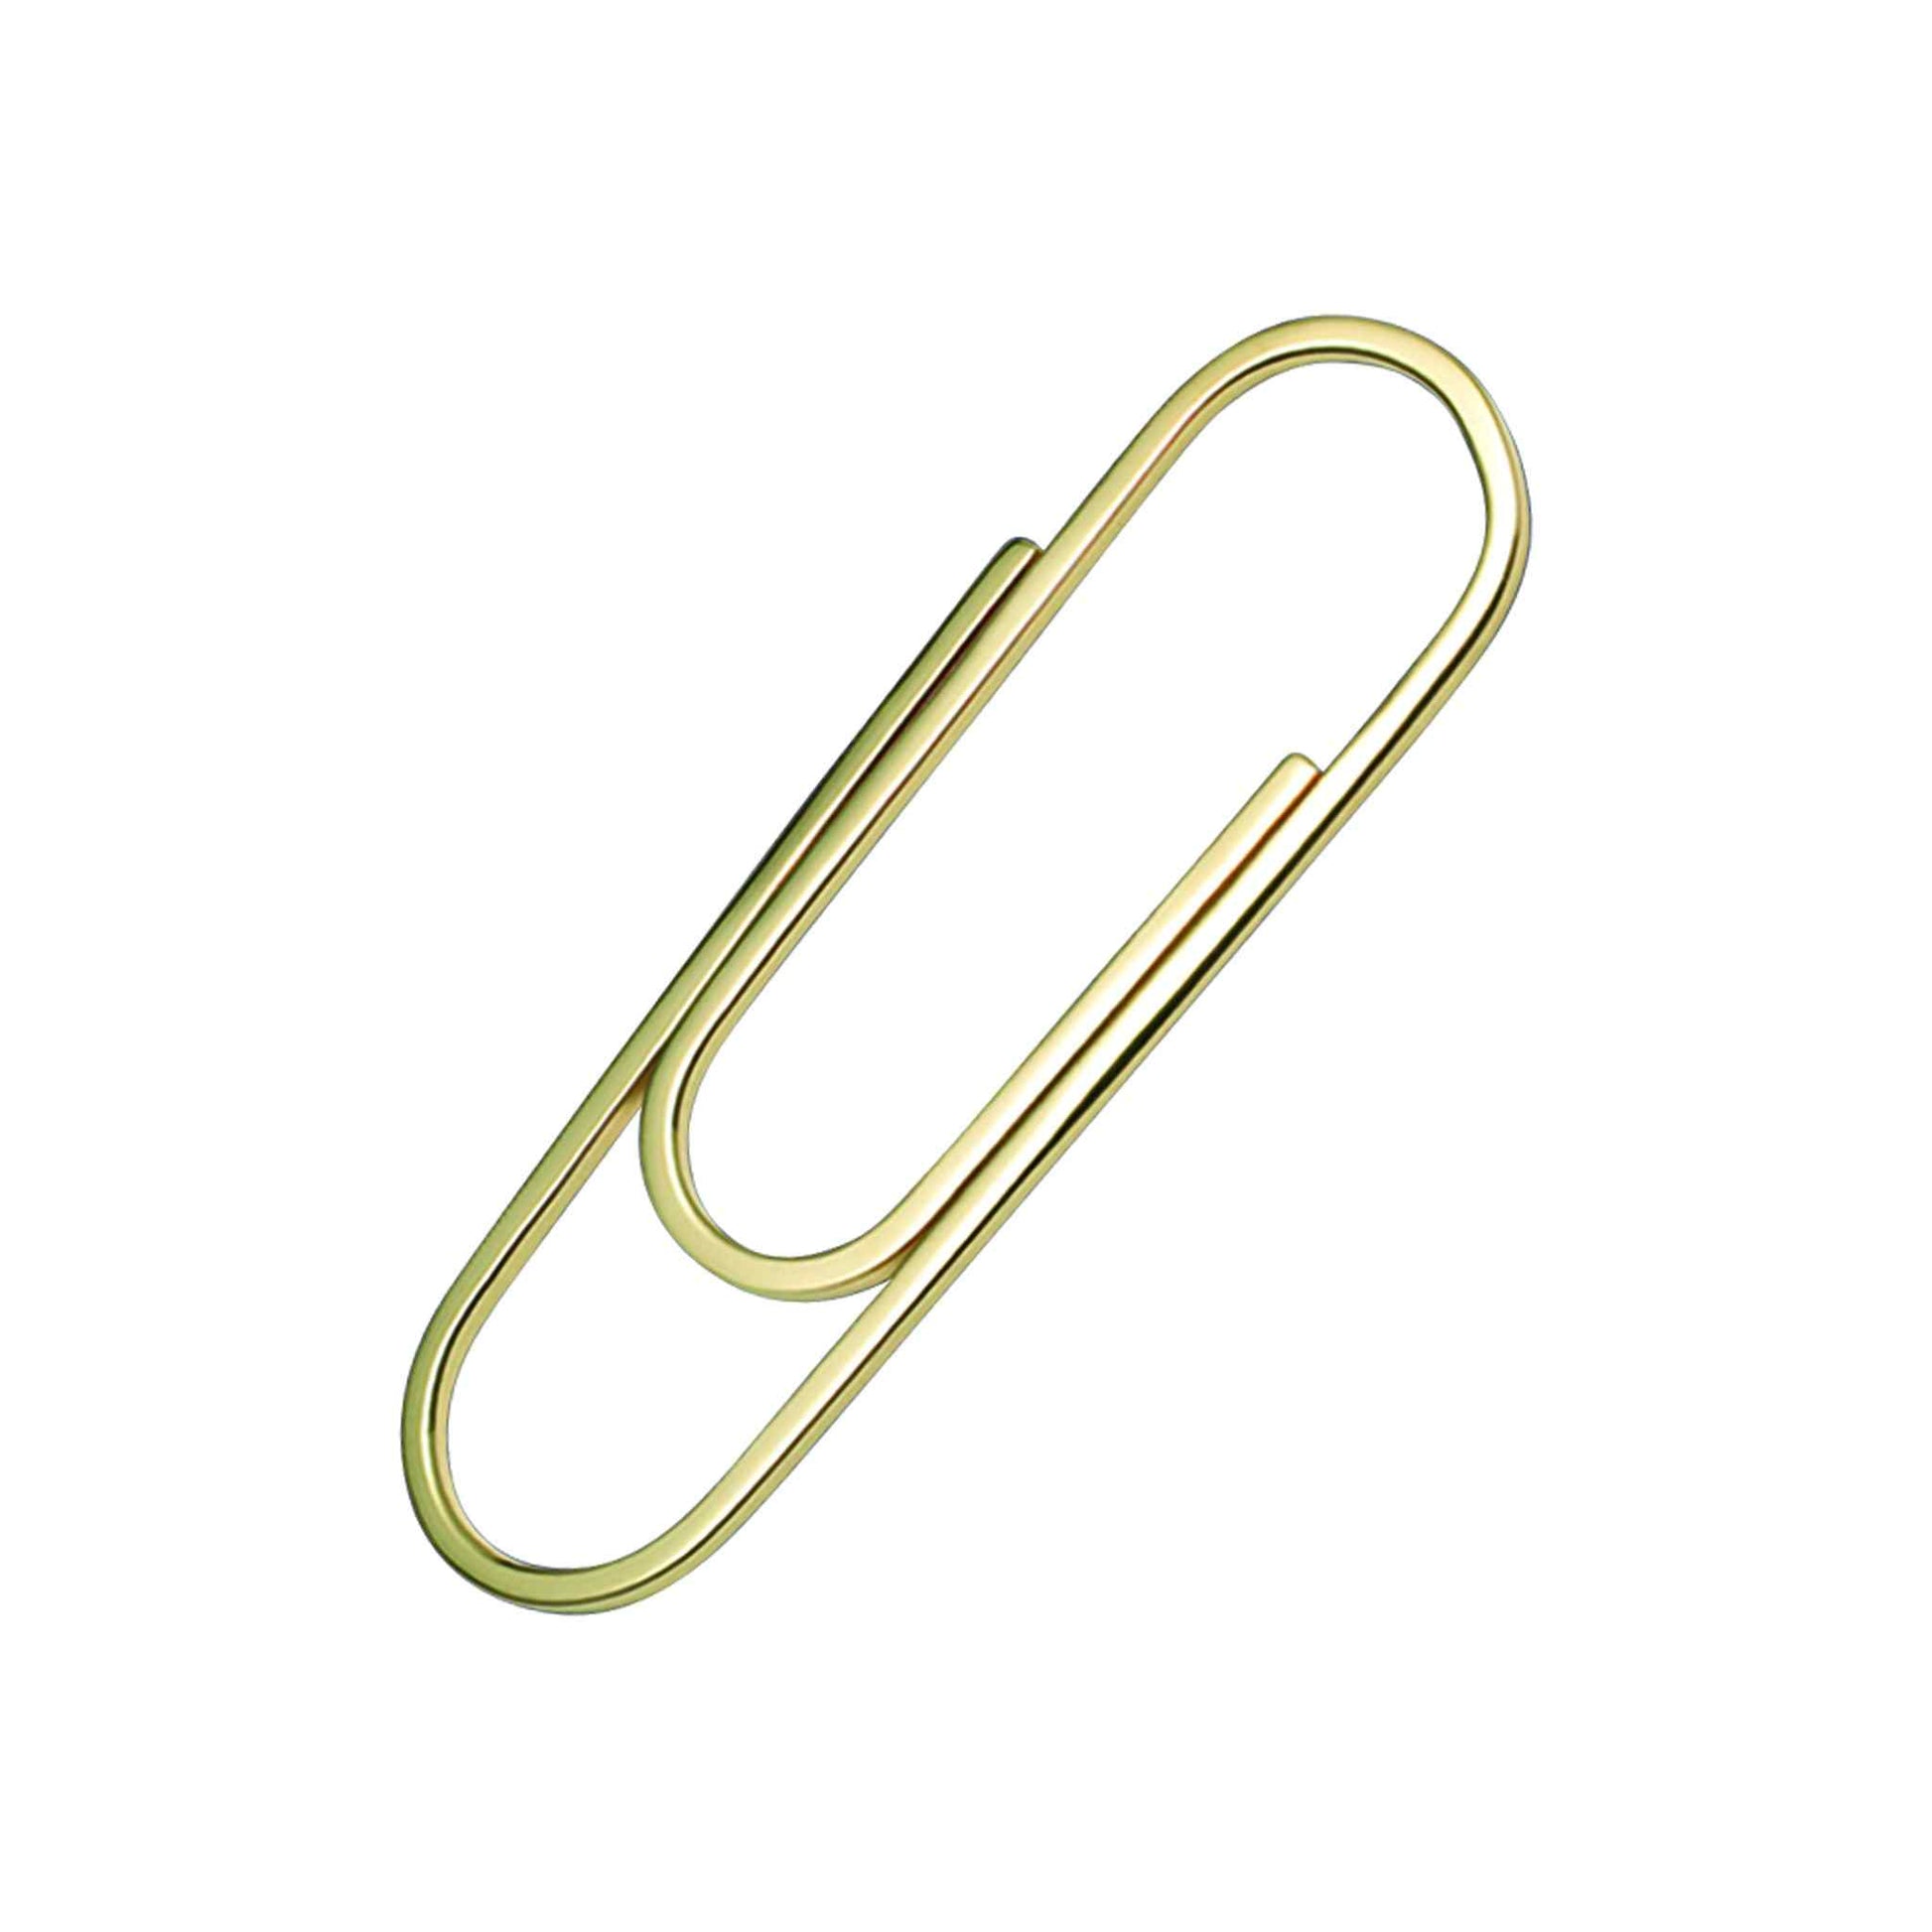 A 14k yellow gold square wire paper clip money clip displayed on a neutral white background.